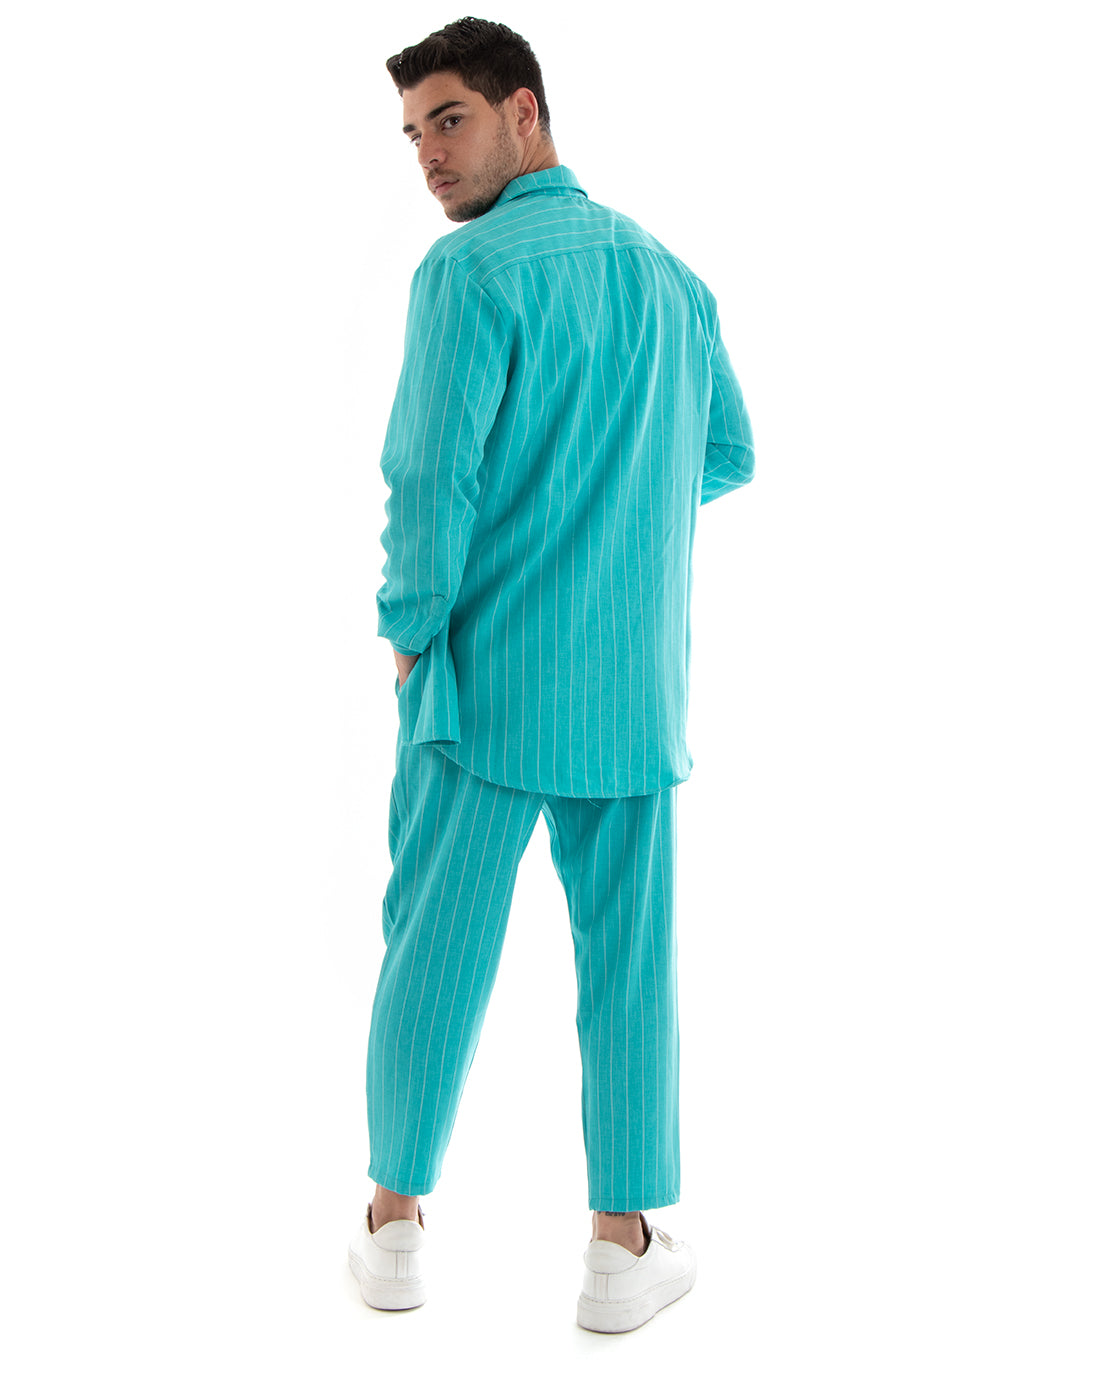 Complete Coordinated Set for Men Viscose Shirt With Collar Trousers Outfit Striped Pinstripe Light Blue GIOSAL-OU2266A